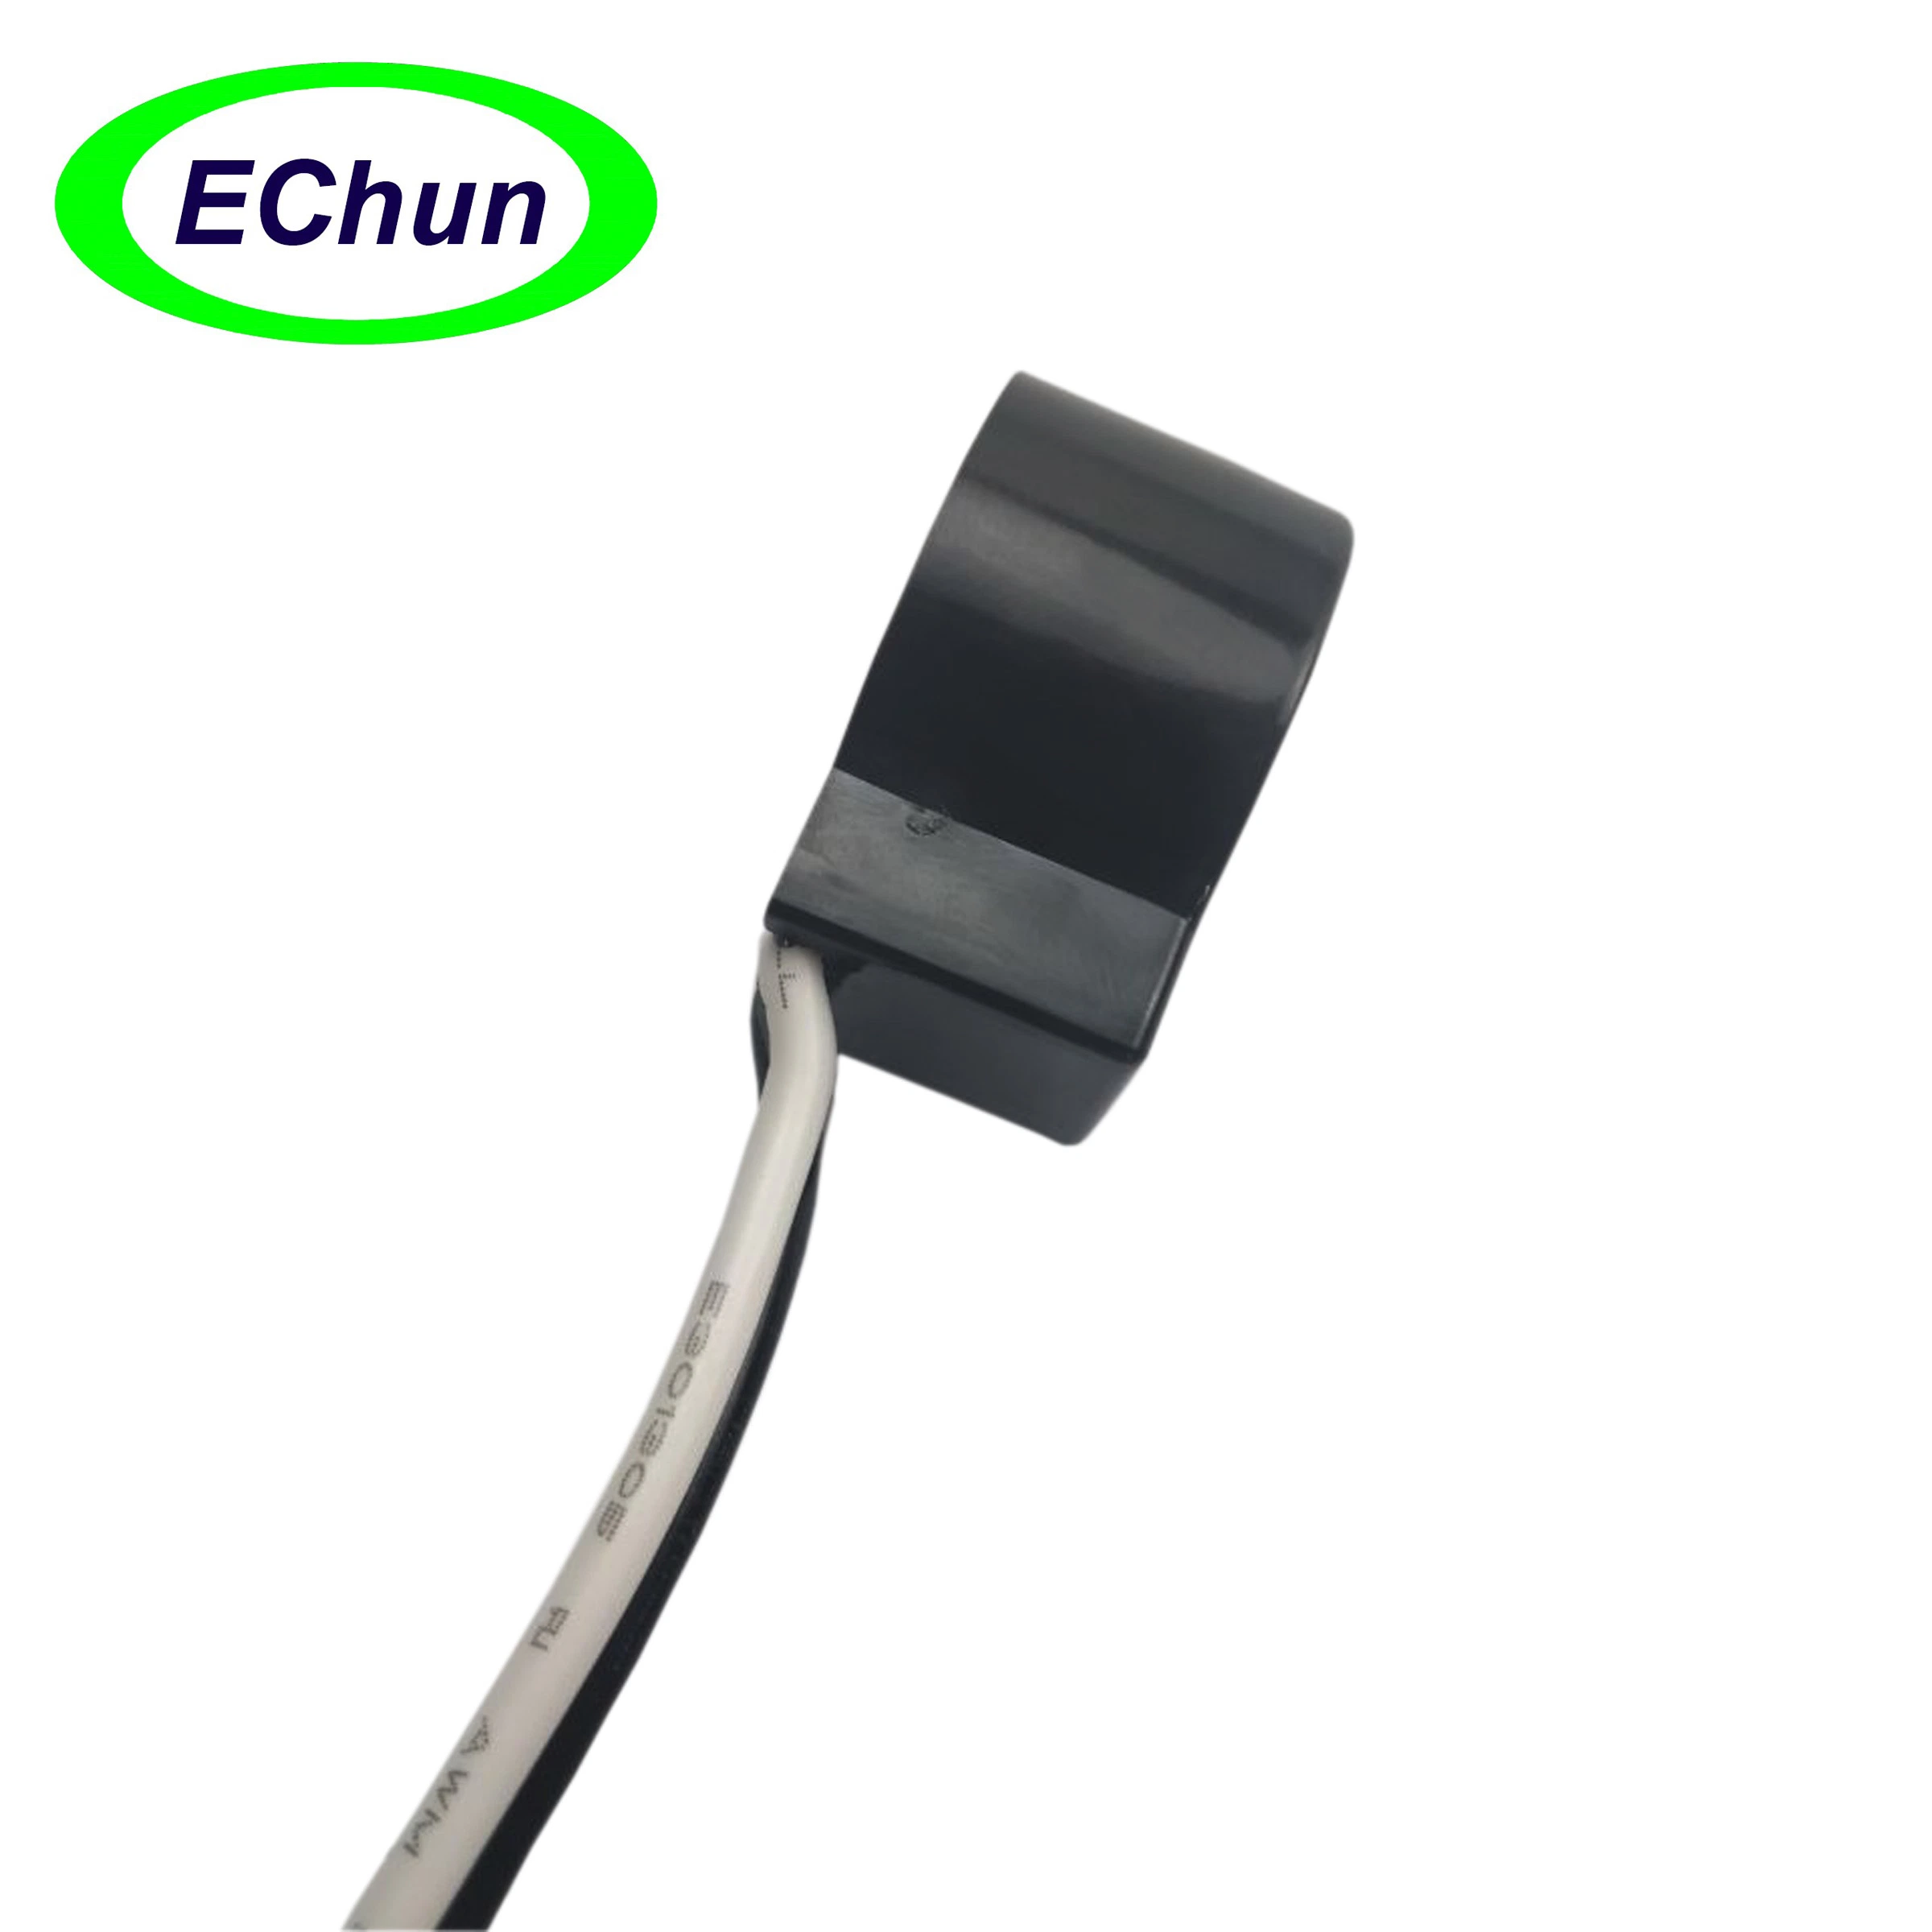 Echun Ecol09 9mm Inner Hole AC 50A/50mA UL 2808 Xoba Solid Core Current Transformer with 3.5mm Jack Plug for Energy Monitoring